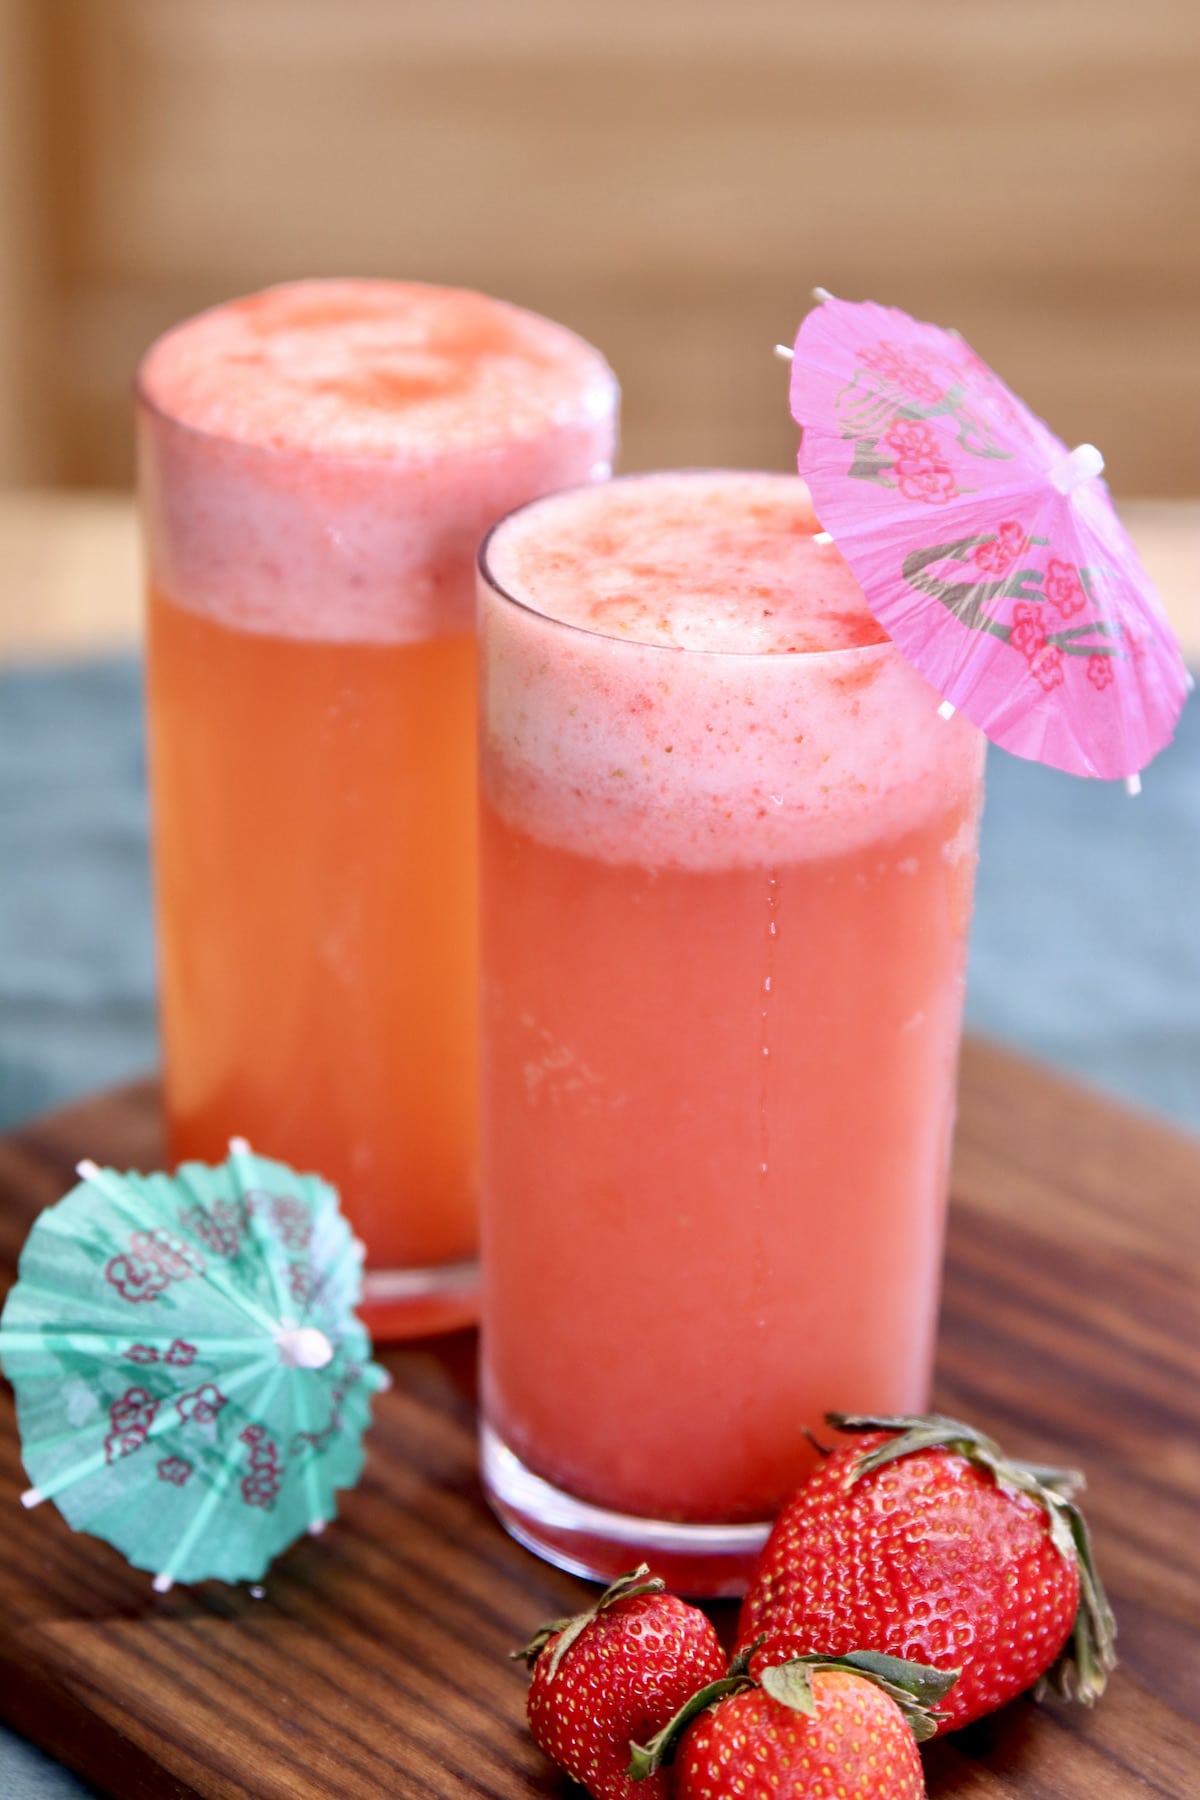 2 glasses of strawberry shandy cocktails with drink umbrellas.